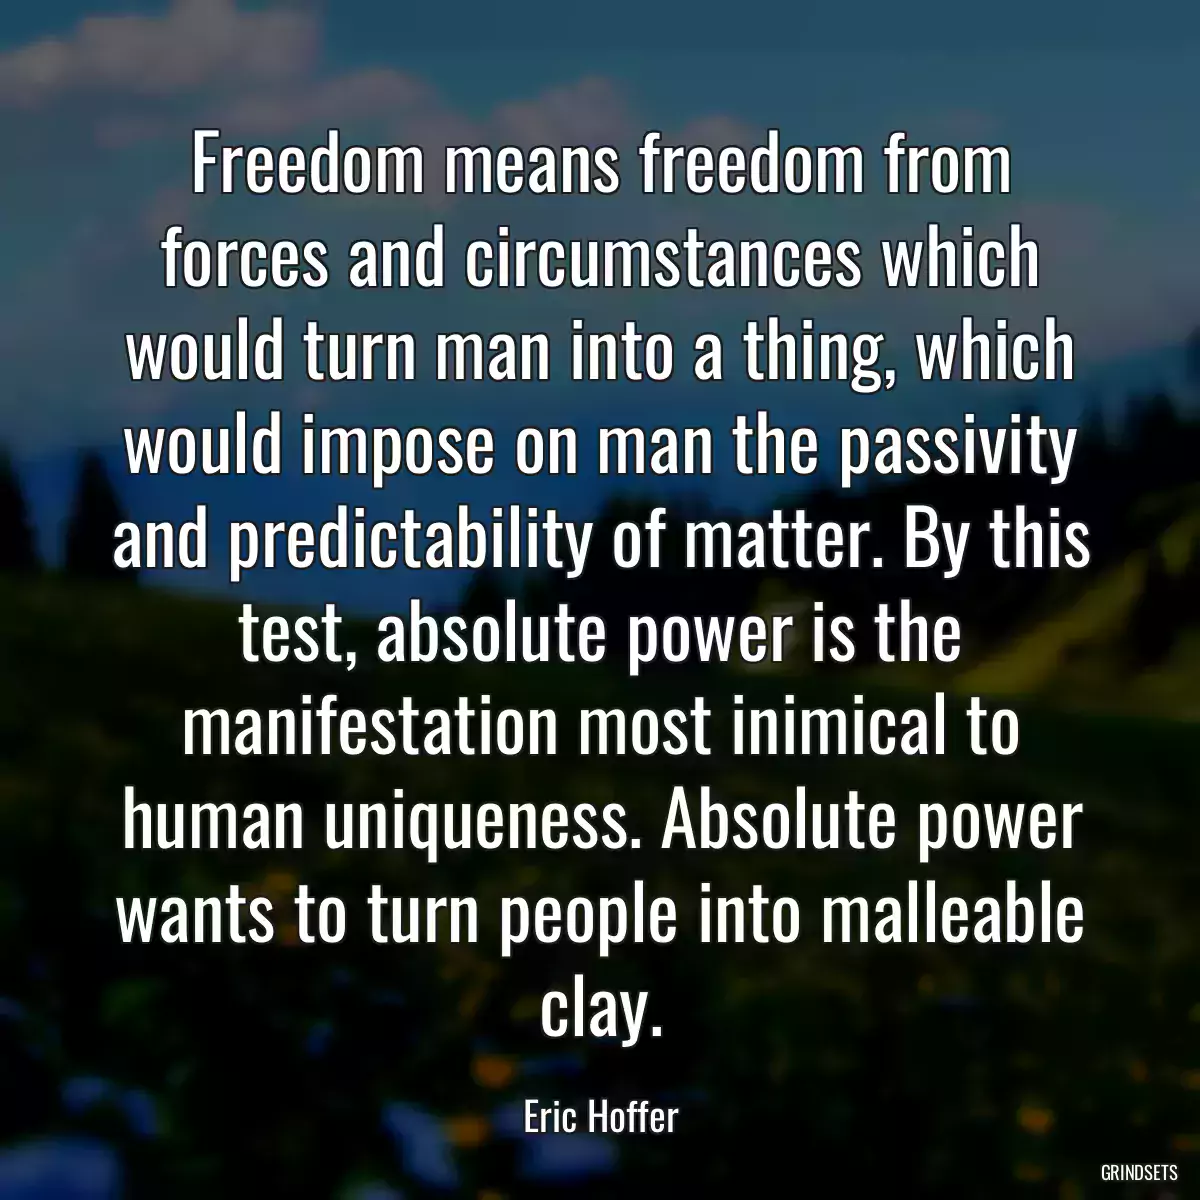 Freedom means freedom from forces and circumstances which would turn man into a thing, which would impose on man the passivity and predictability of matter. By this test, absolute power is the manifestation most inimical to human uniqueness. Absolute power wants to turn people into malleable clay.